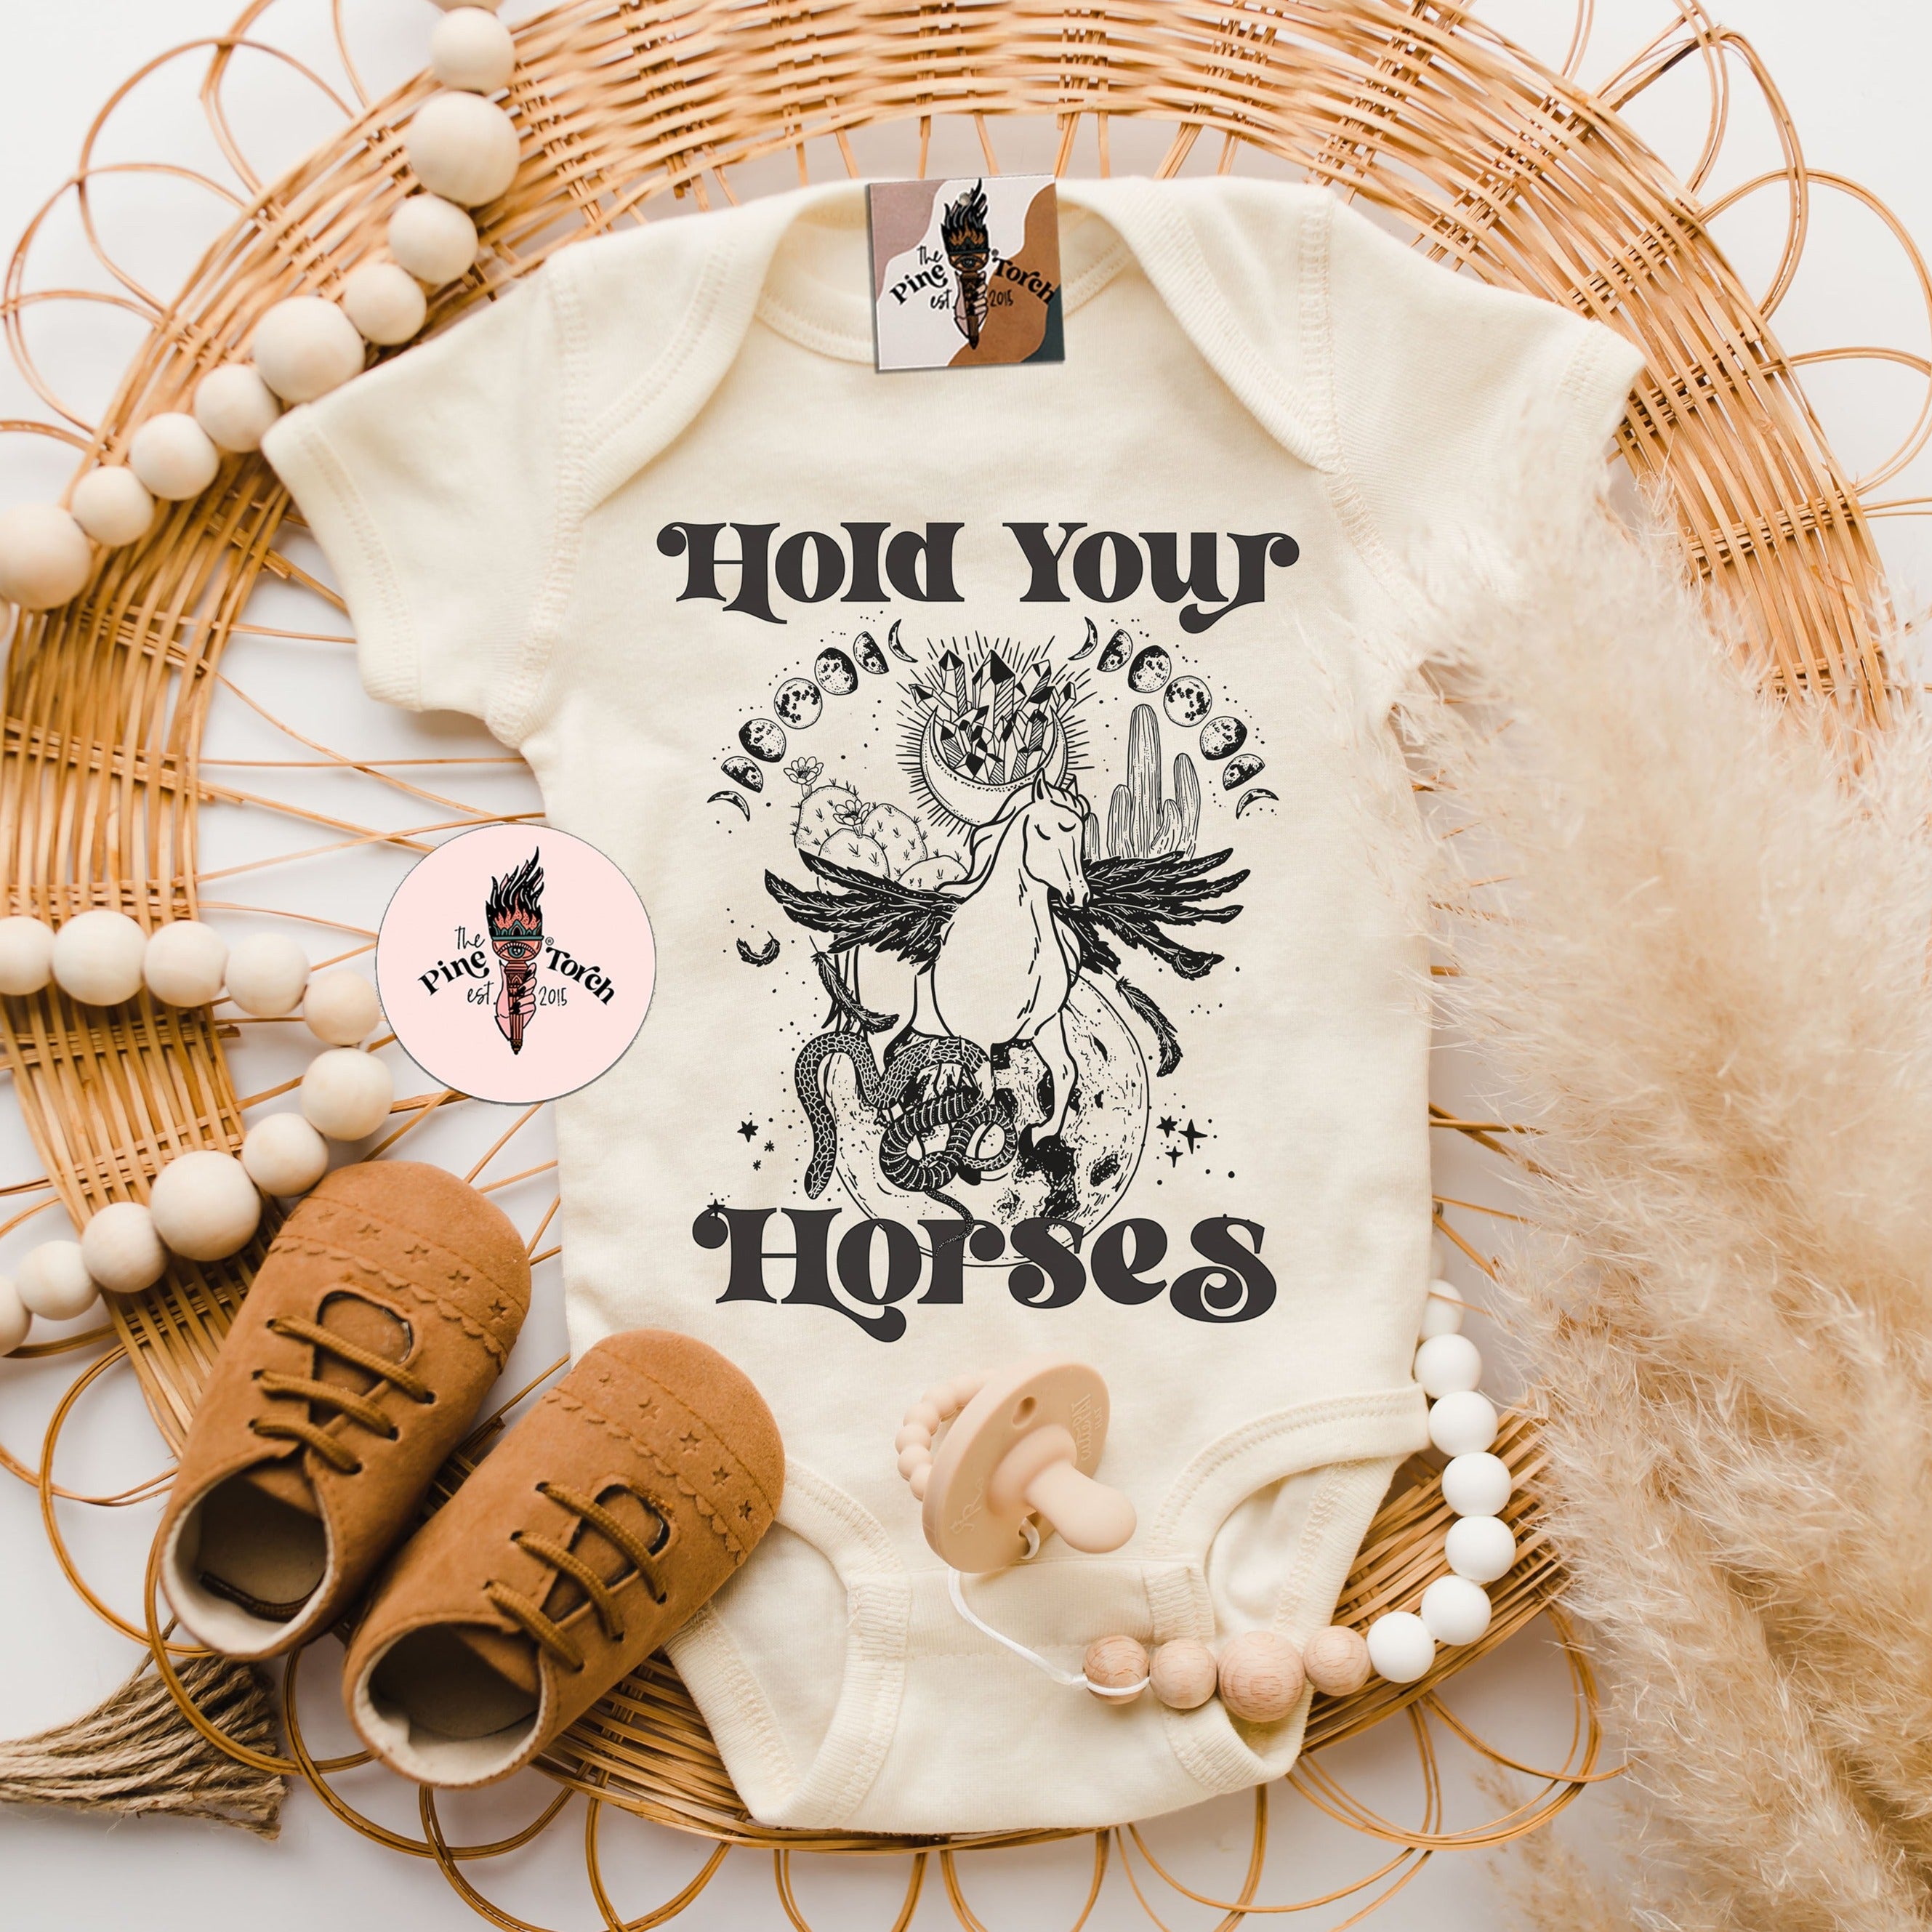 « HOLD YOUR HORSES » BODYSUIT